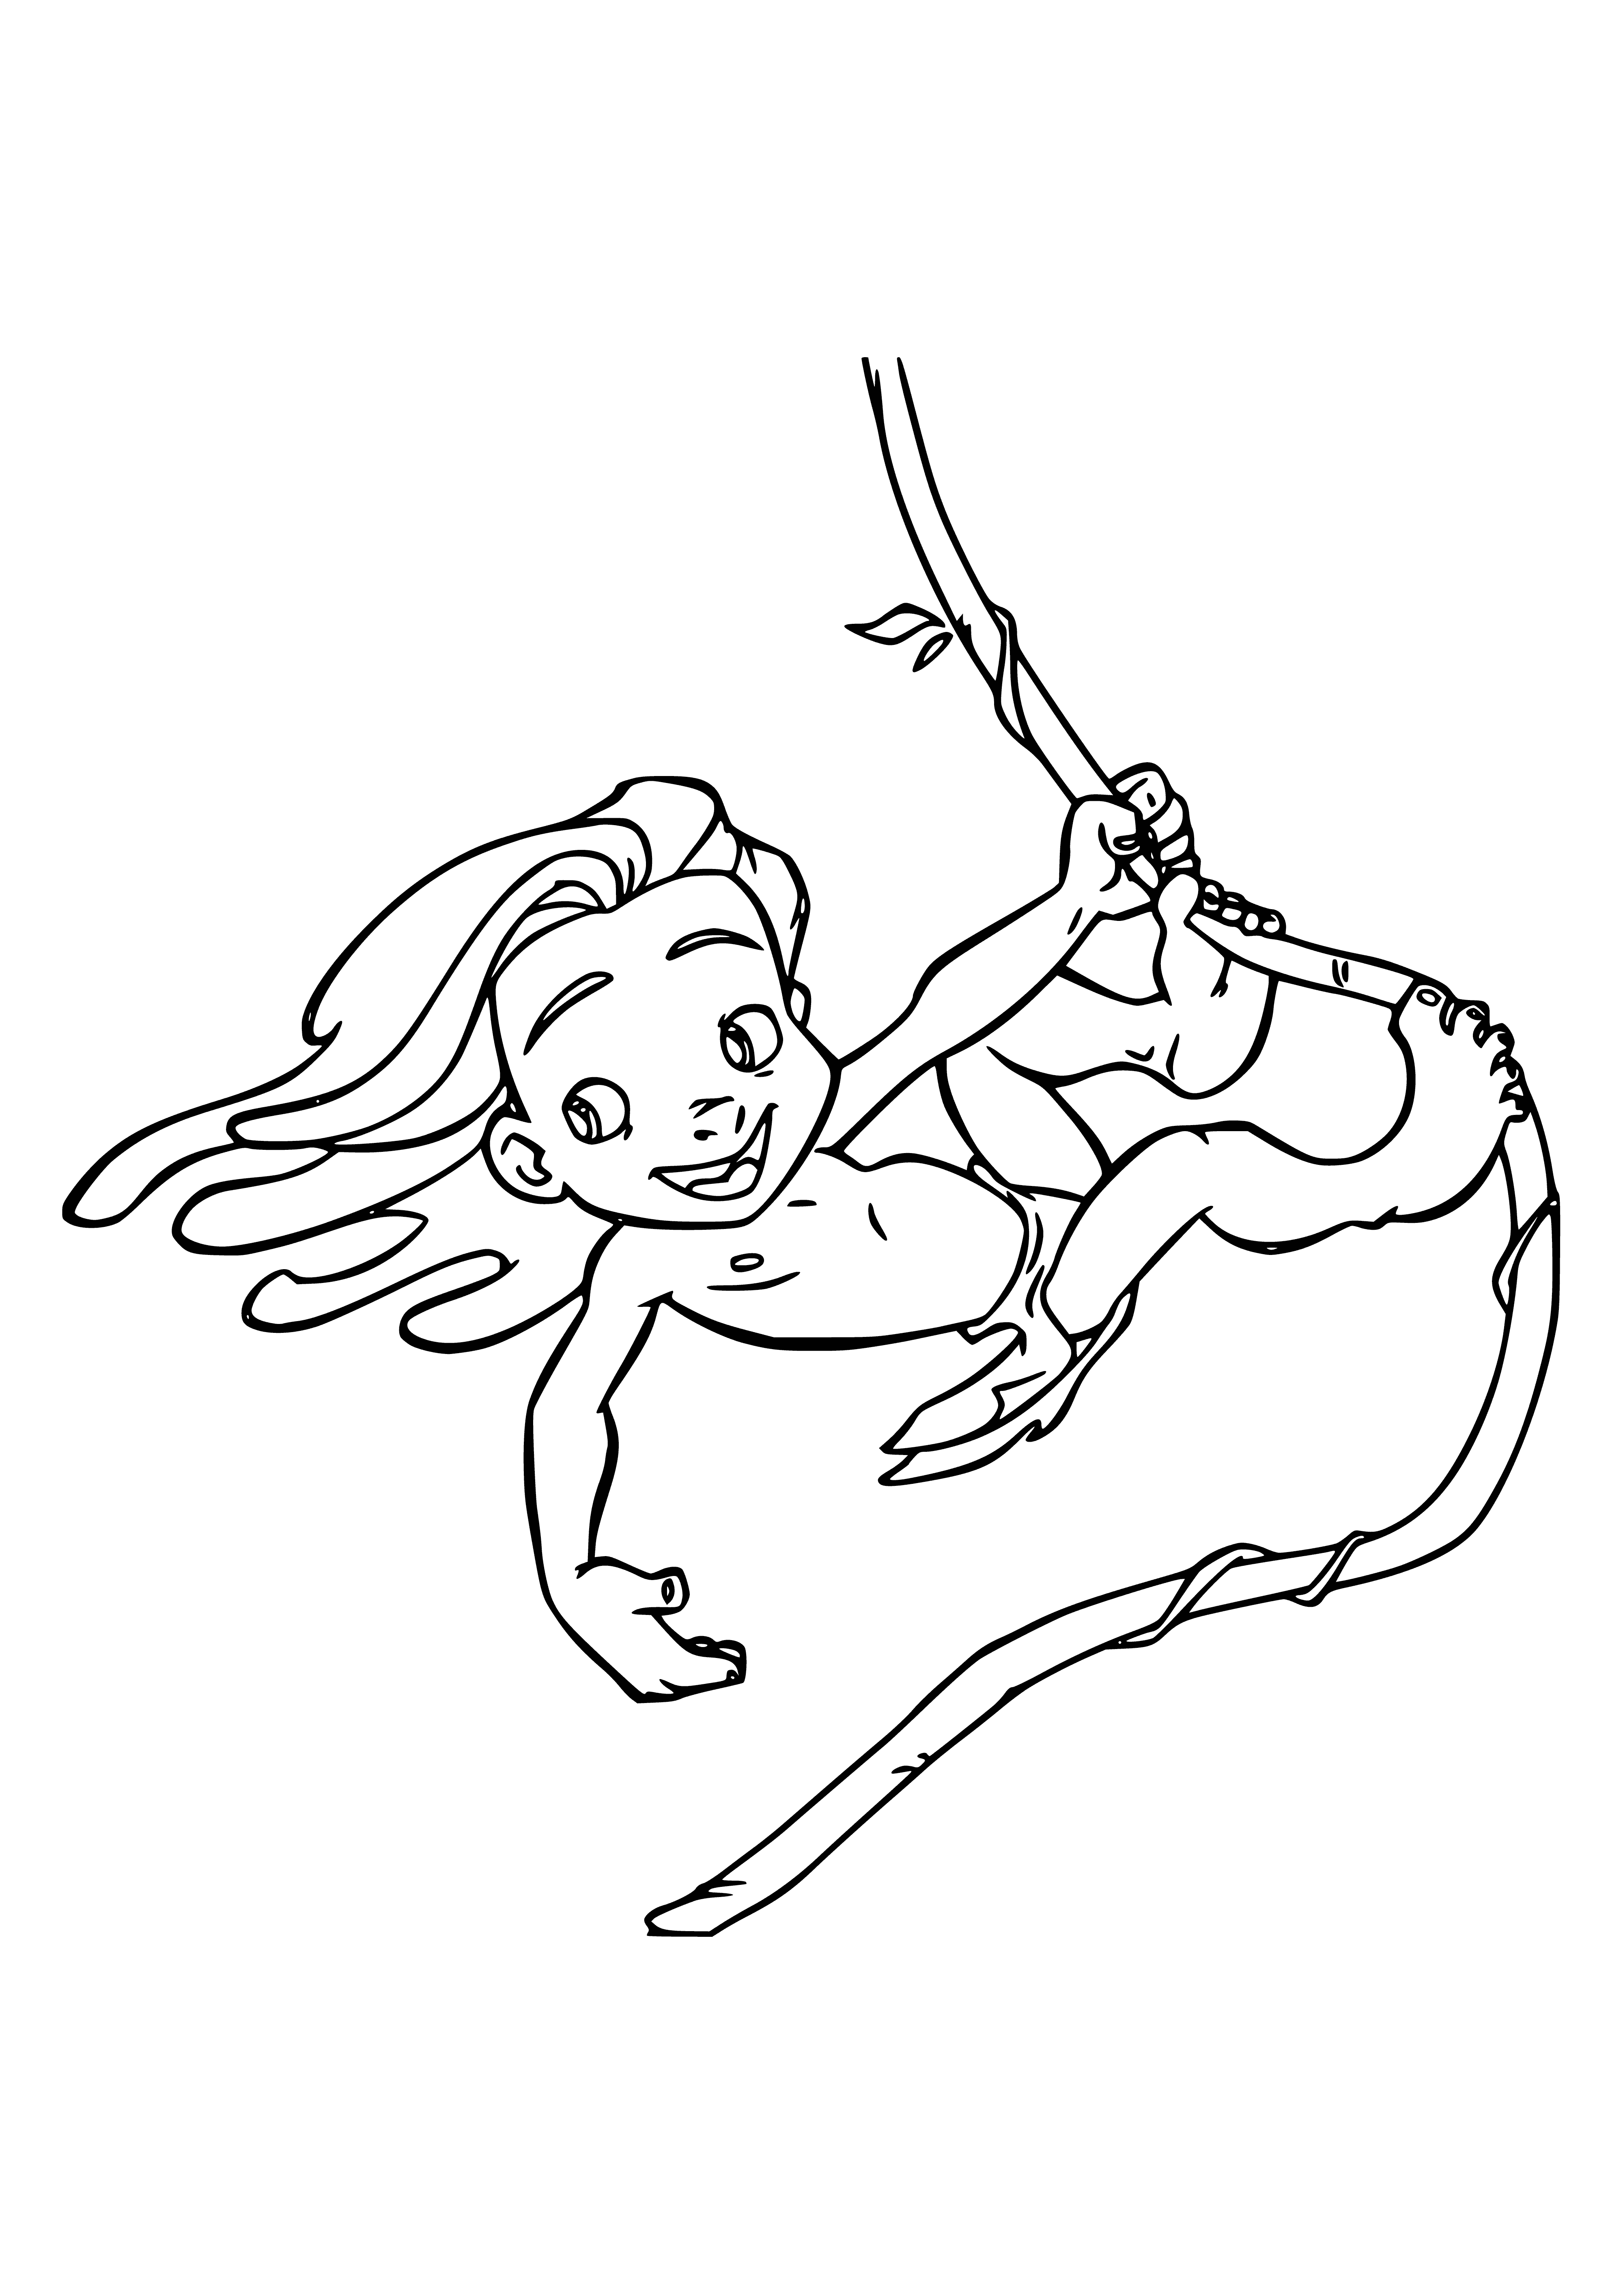 Young Tarzan on the liana coloring page